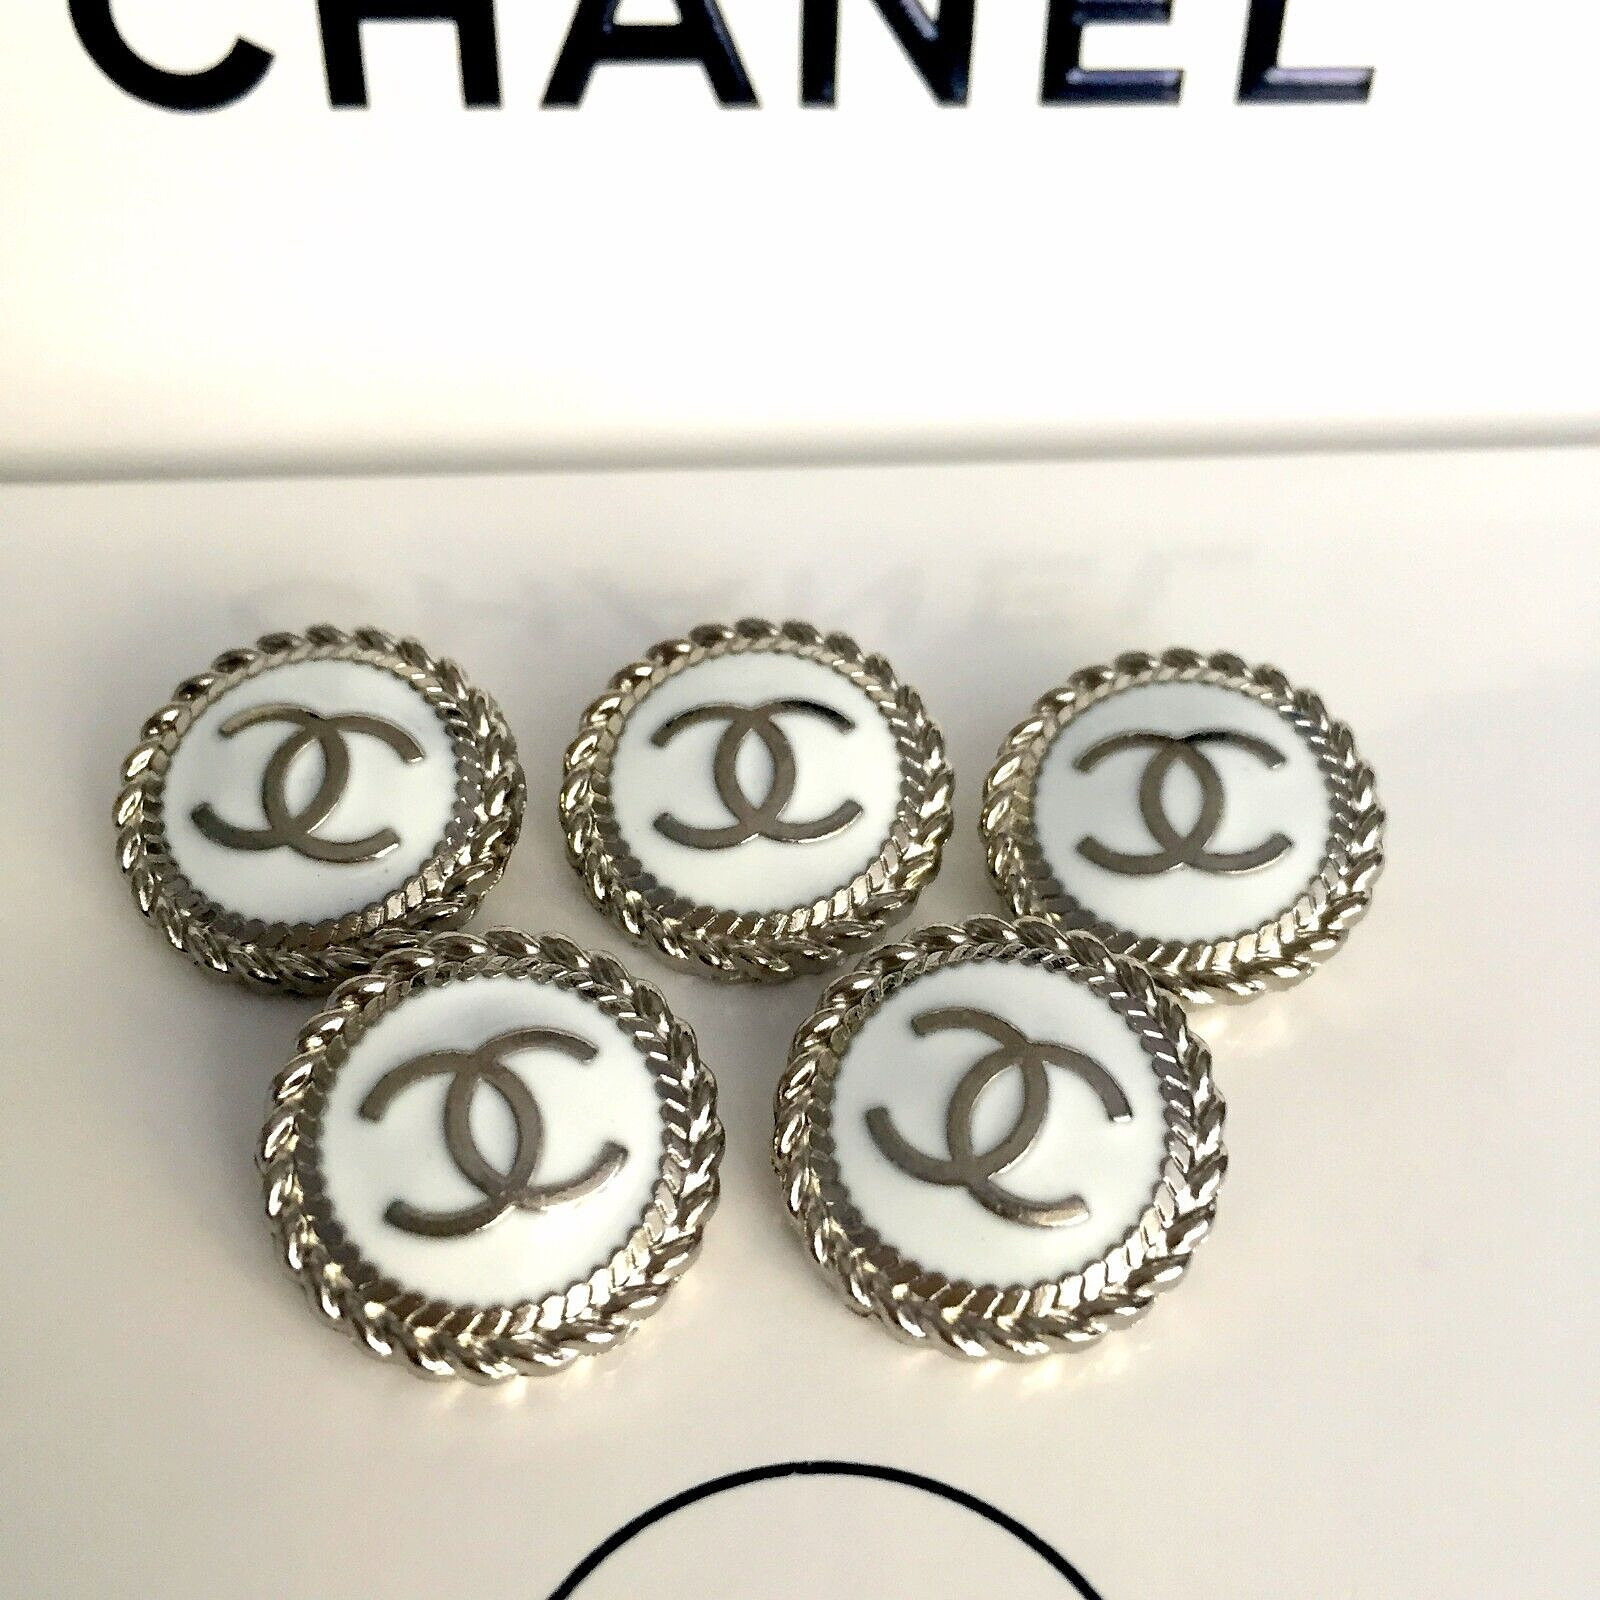 SET 8 Vintage 20 mm Chanel CC Stamped  Logo Silver tone Buttons 0,79 inch